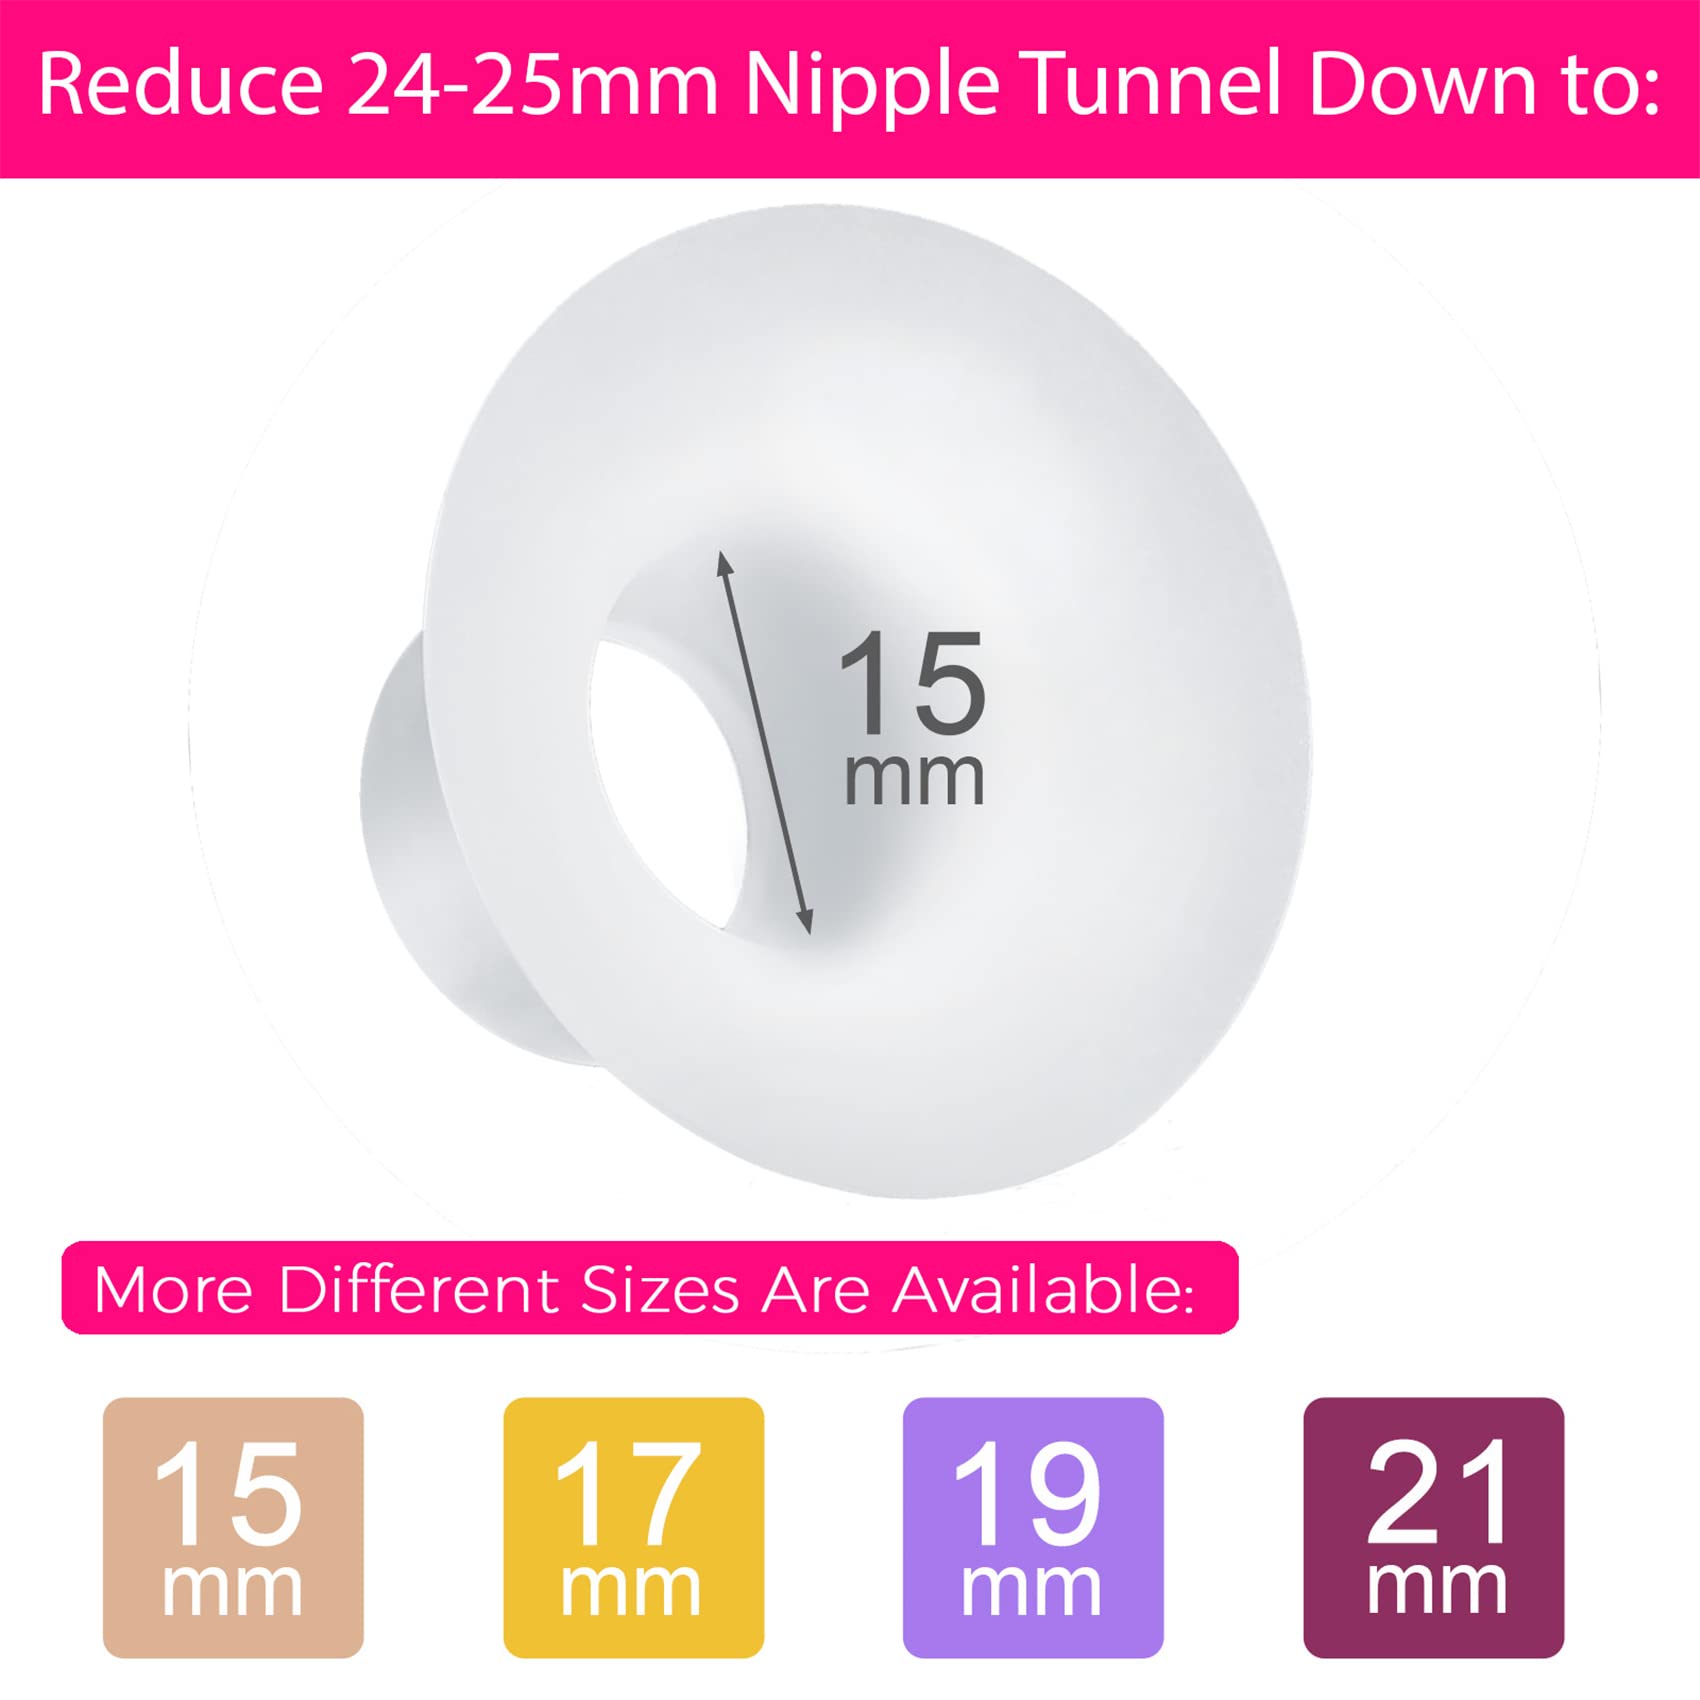 Durceler 22mm Silicone Flange Inserts Compatible with Medela / for Spectra S1 S2 / Rainyb / Willow go/ Momcozy S12/ TSRETE 24mm Breast Pump Shields or Freemie 25mm; Reduce Nipple Tunnel Down to 22mm